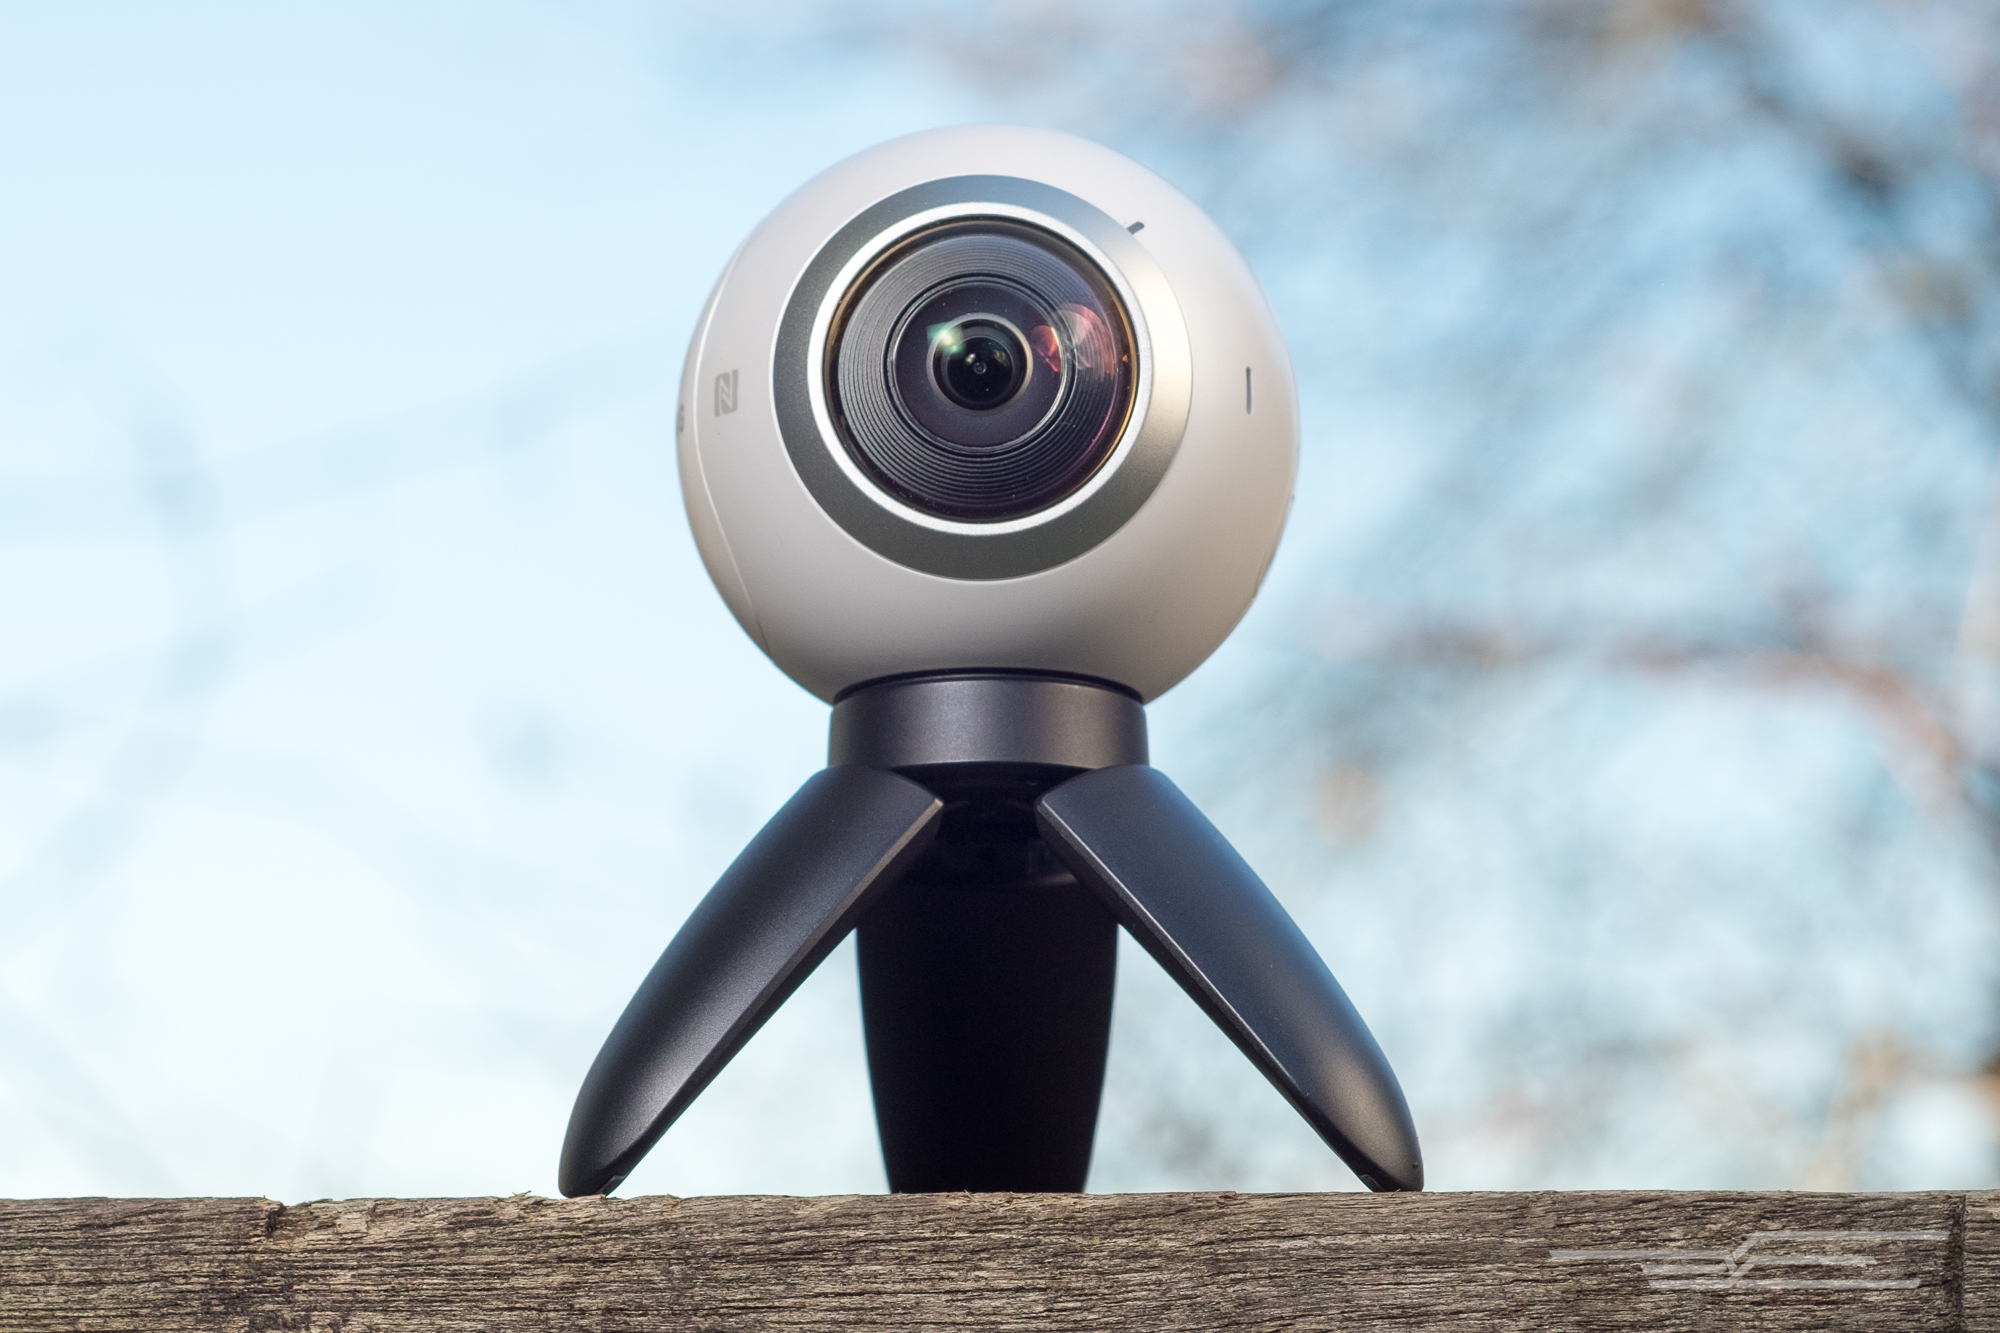 360-Degree Camera Market Sizer 2022, Growth Statistics, Industry Demand, Top Manufacturers Data, and Forecast 2027